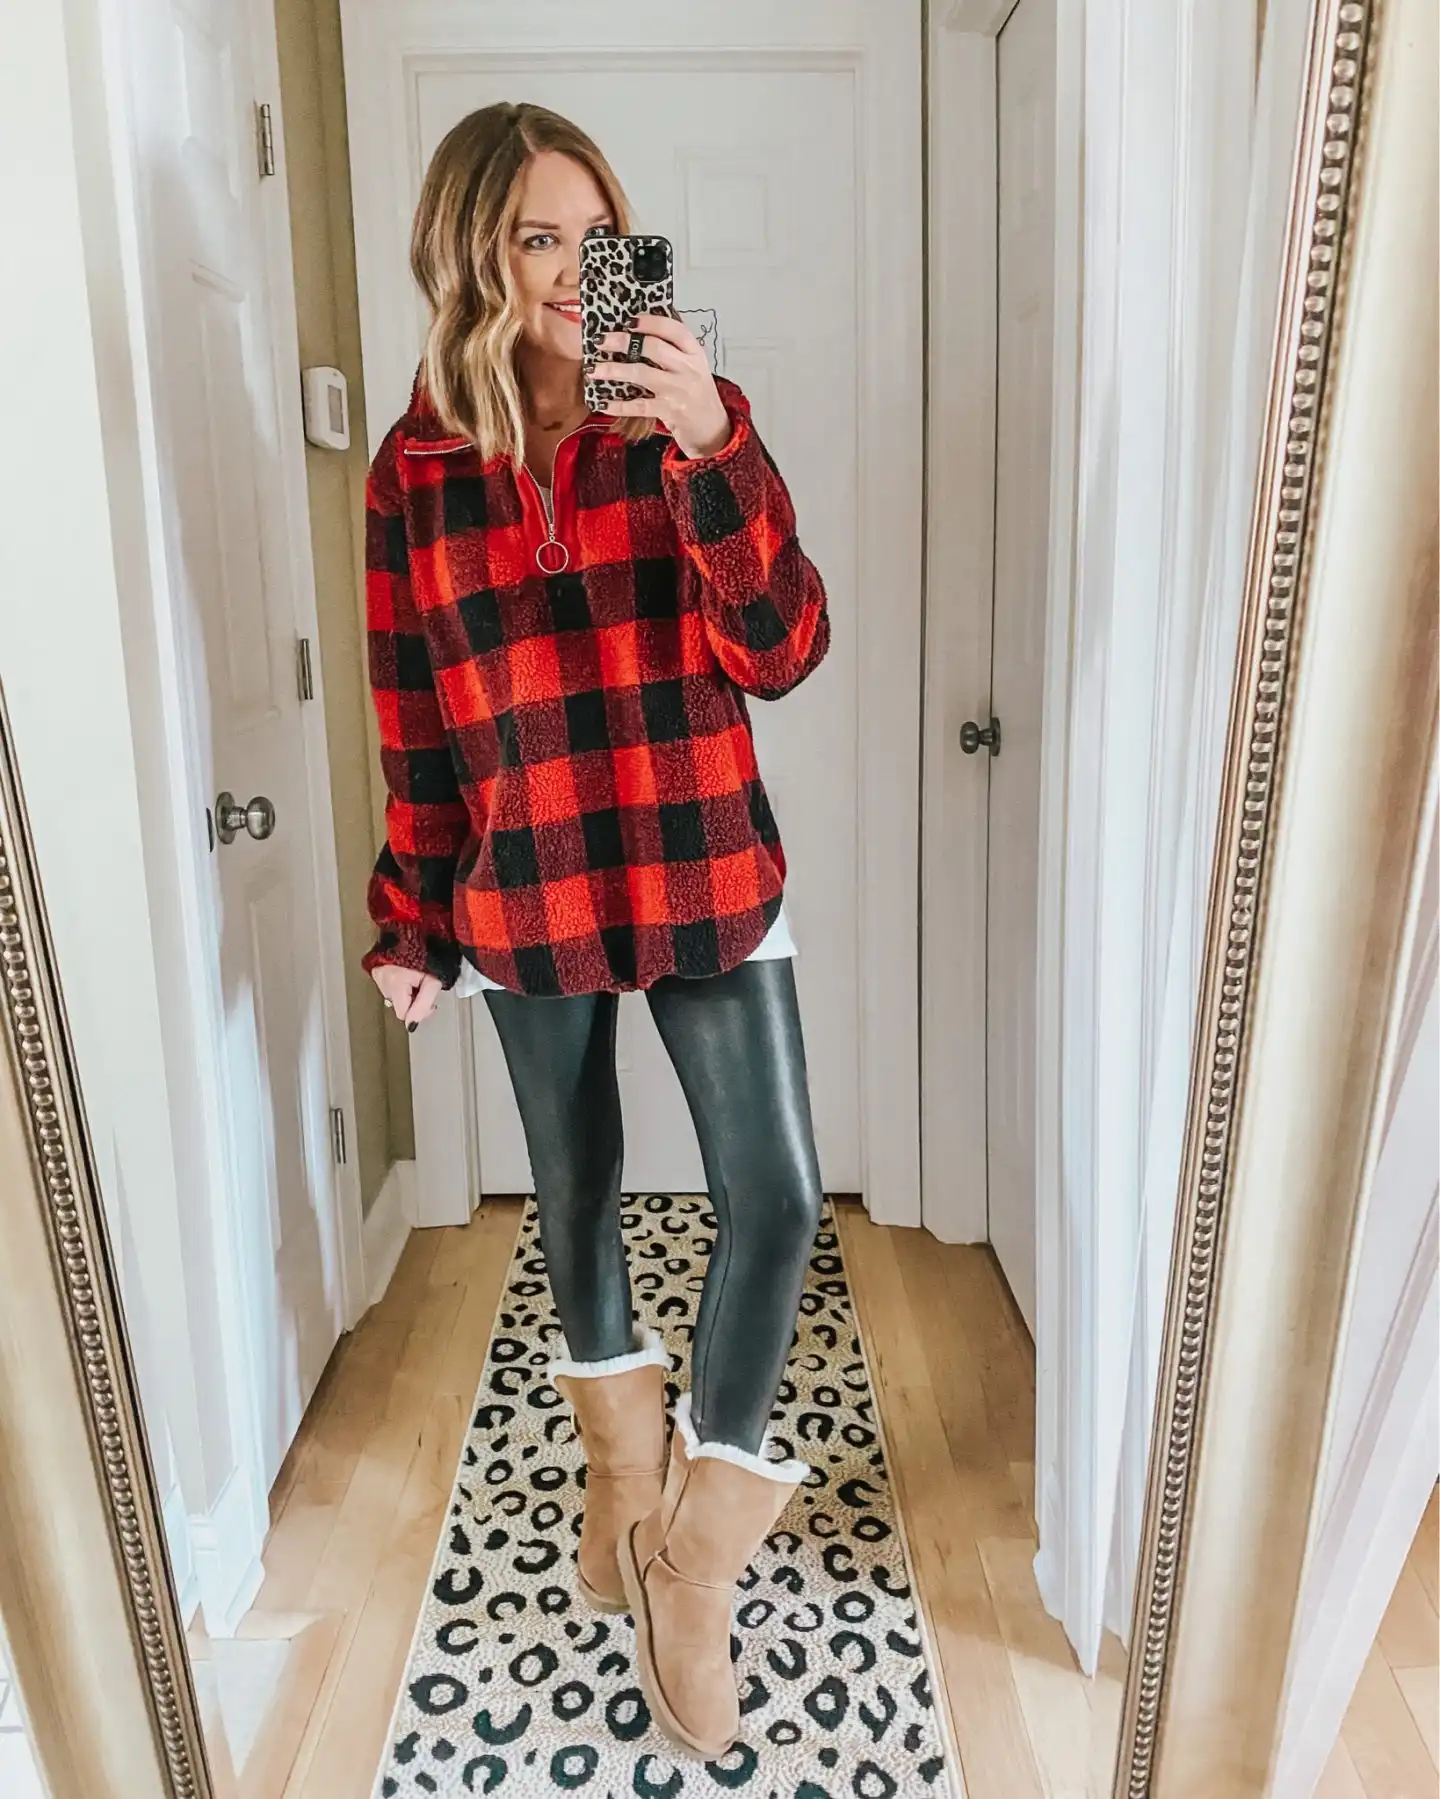 styling-leggings-for-winter-Ugg-boots-outfit